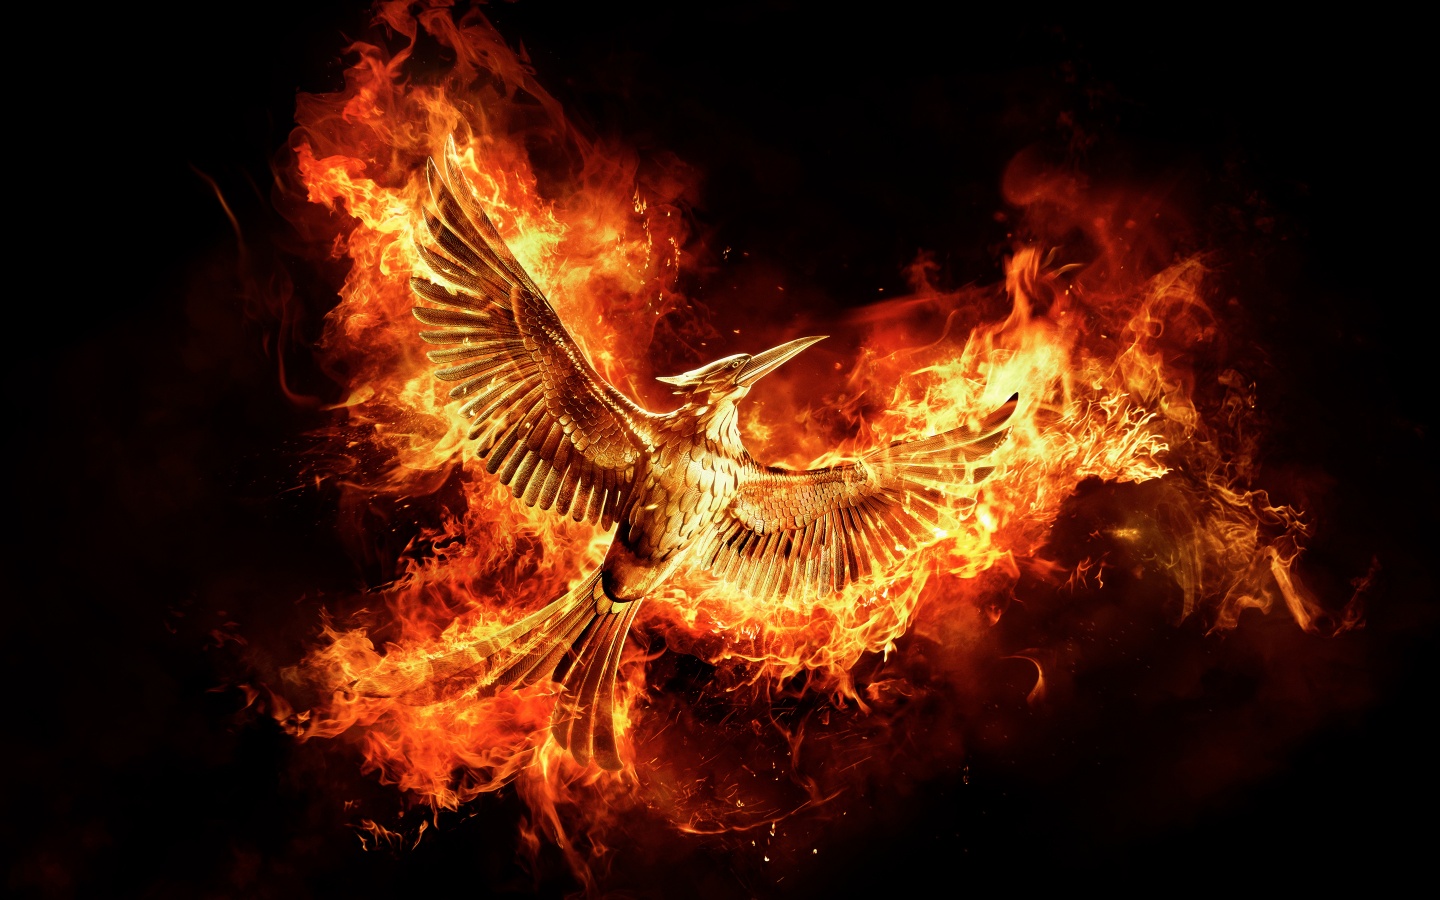 Hunger Games Mockingjay Part 2 Wallpapers HD Wallpapers